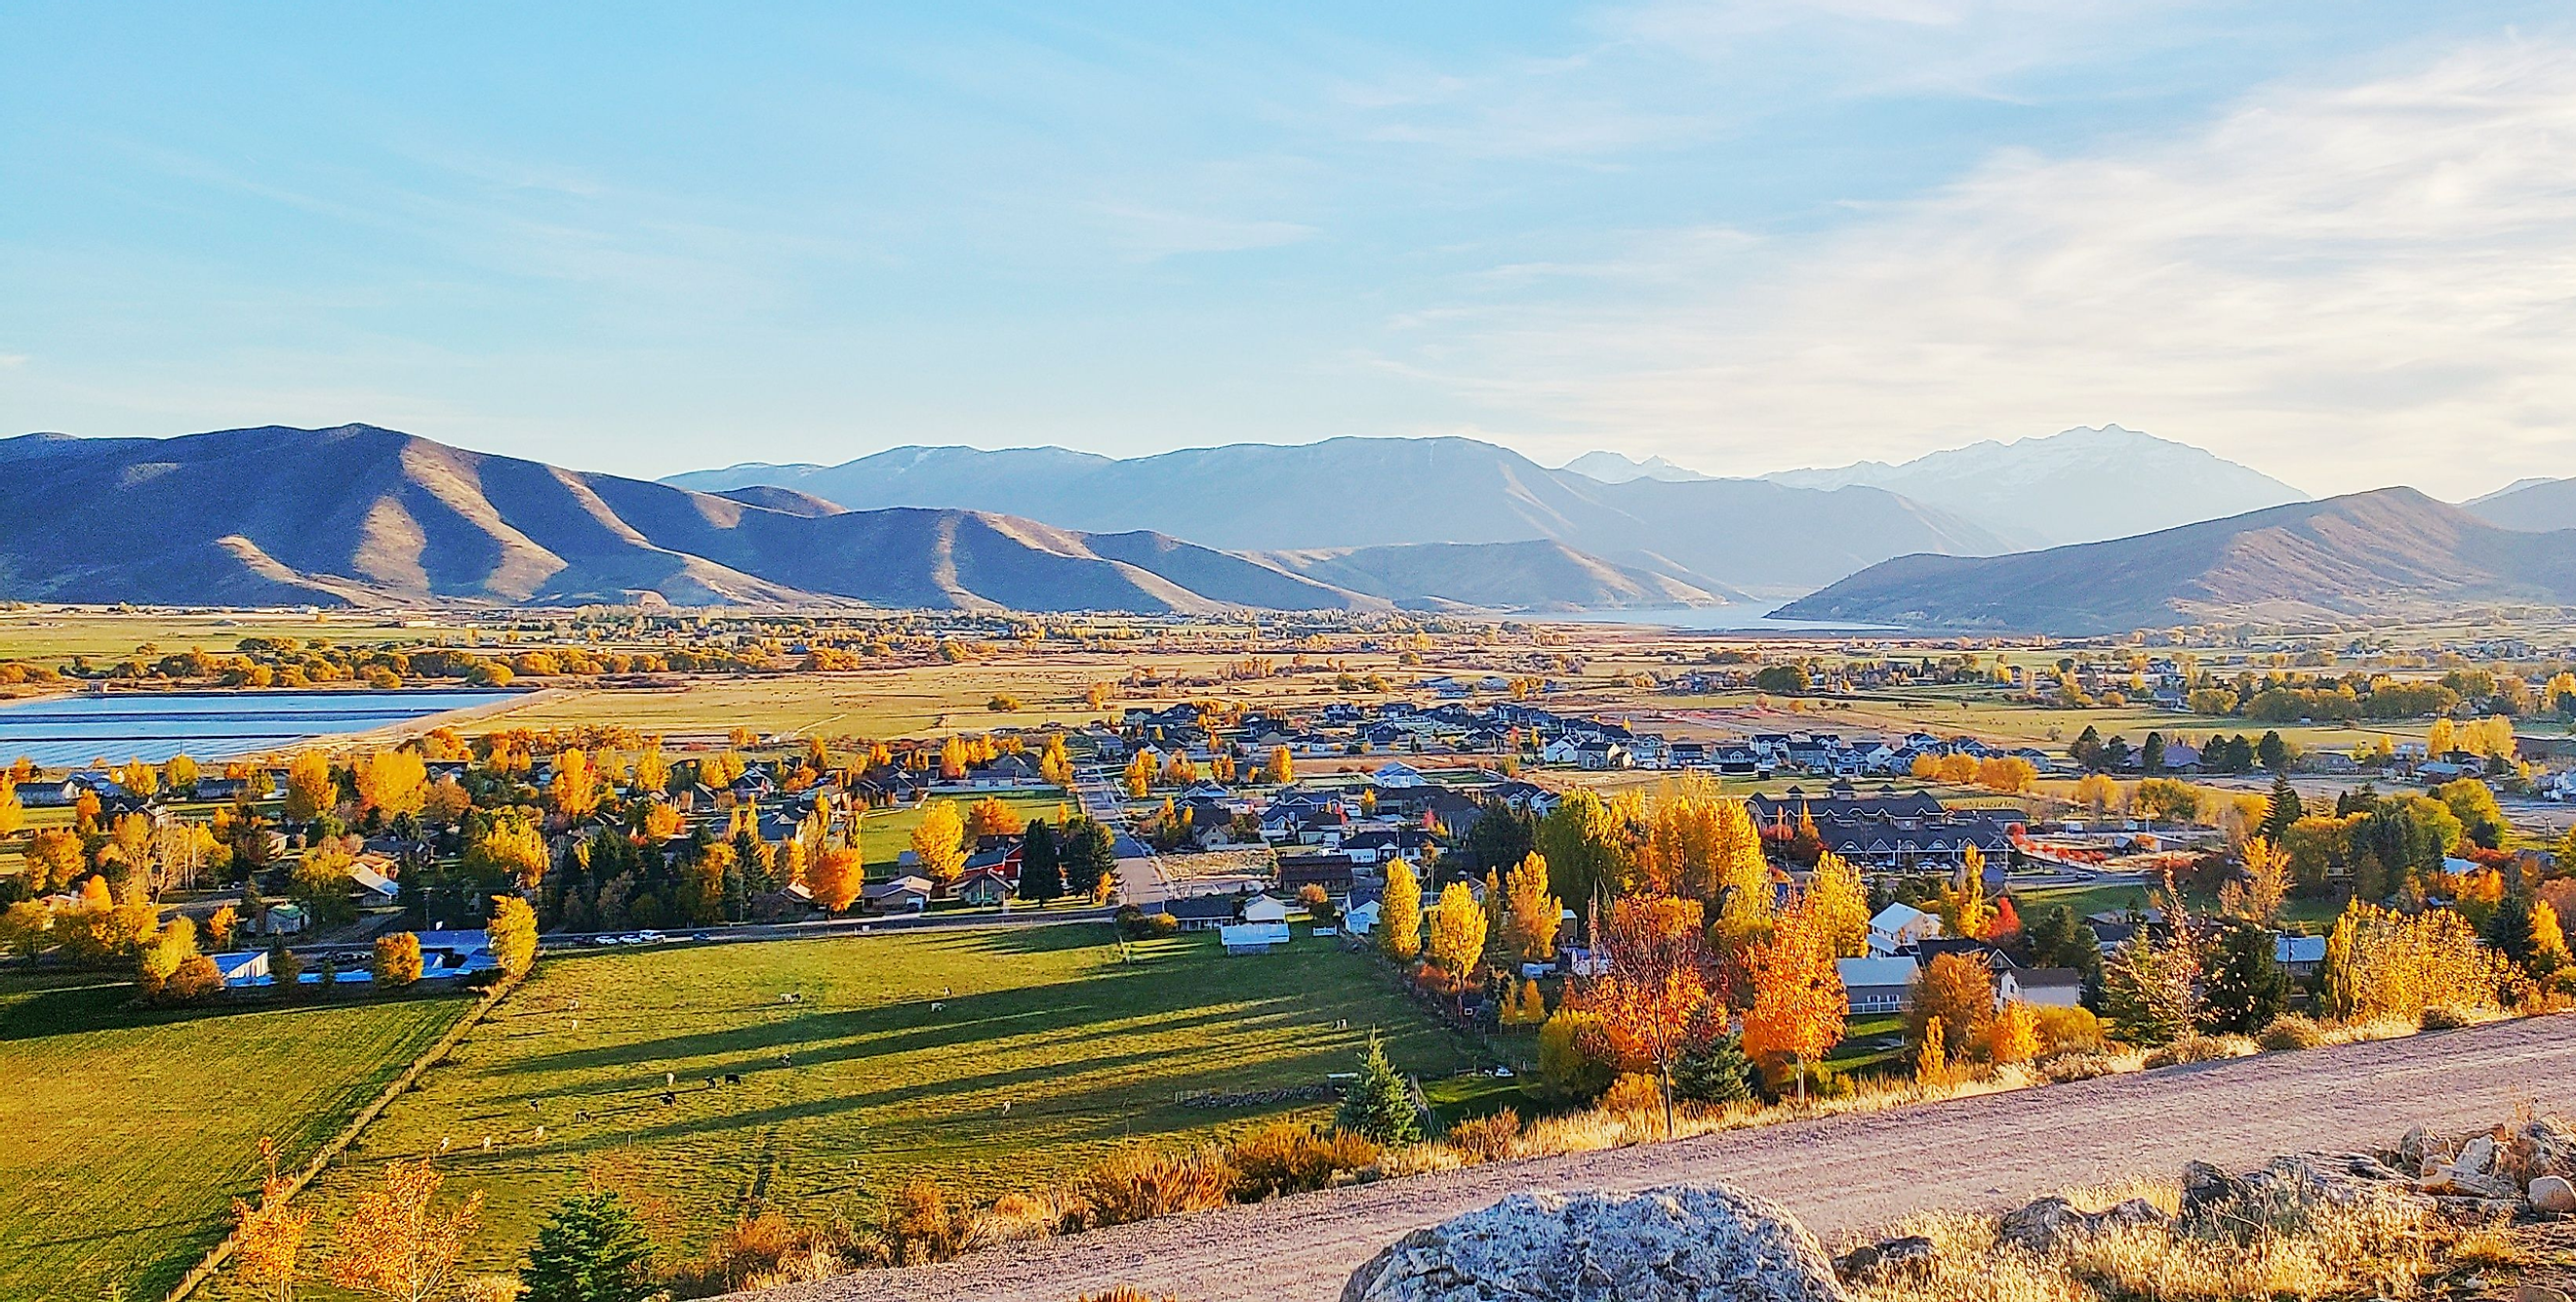 The beautiful Heber Valley in Utah. The leaves have started to turn, picture perfect background.